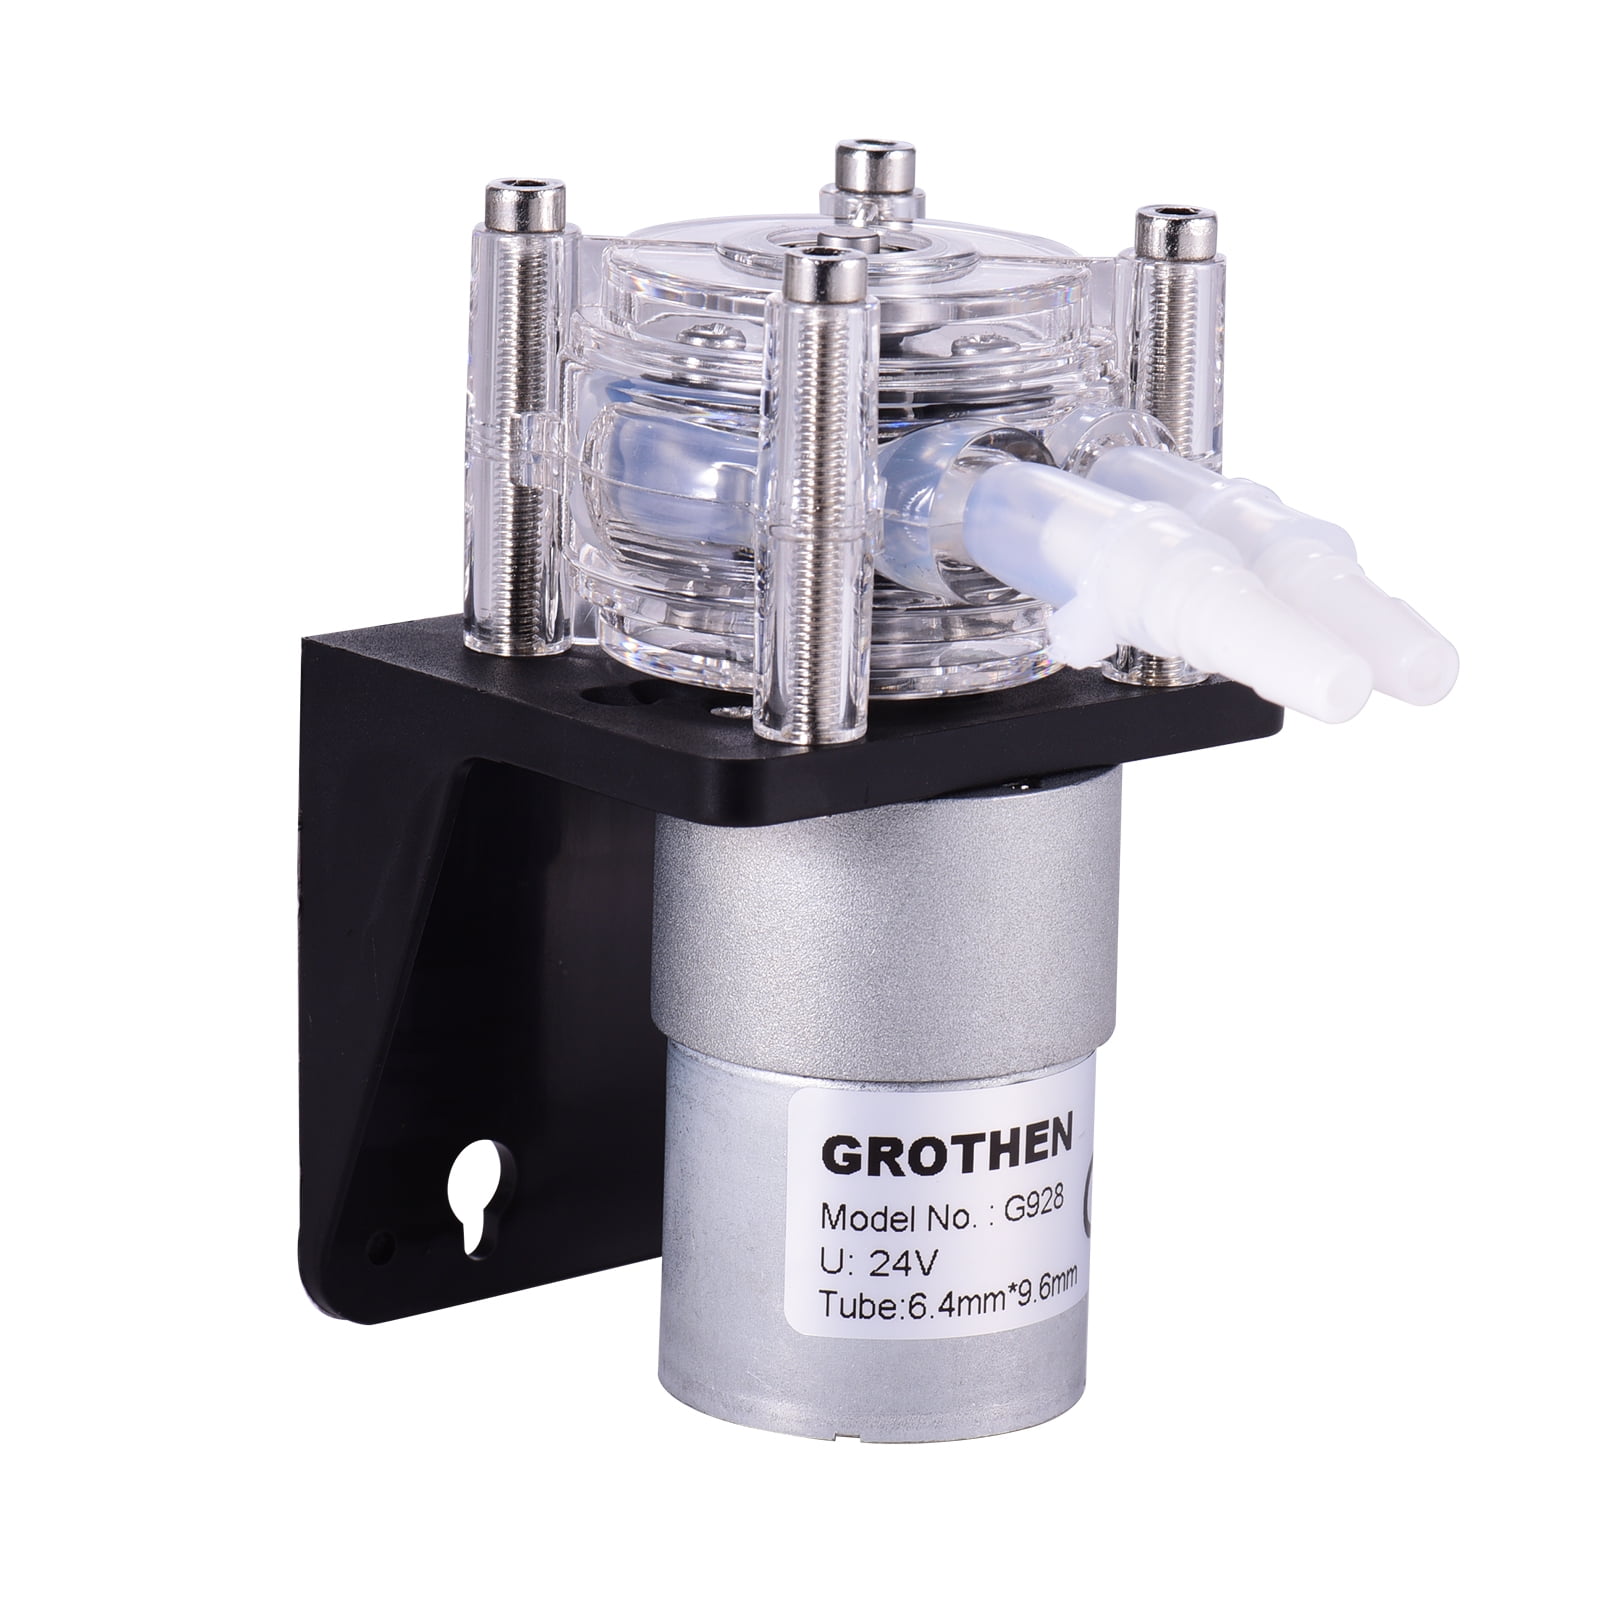 Arealer Grothen Dc V Peristaltic Pump With Silicone Tubing High Water Liquid Pump Dosing Pump